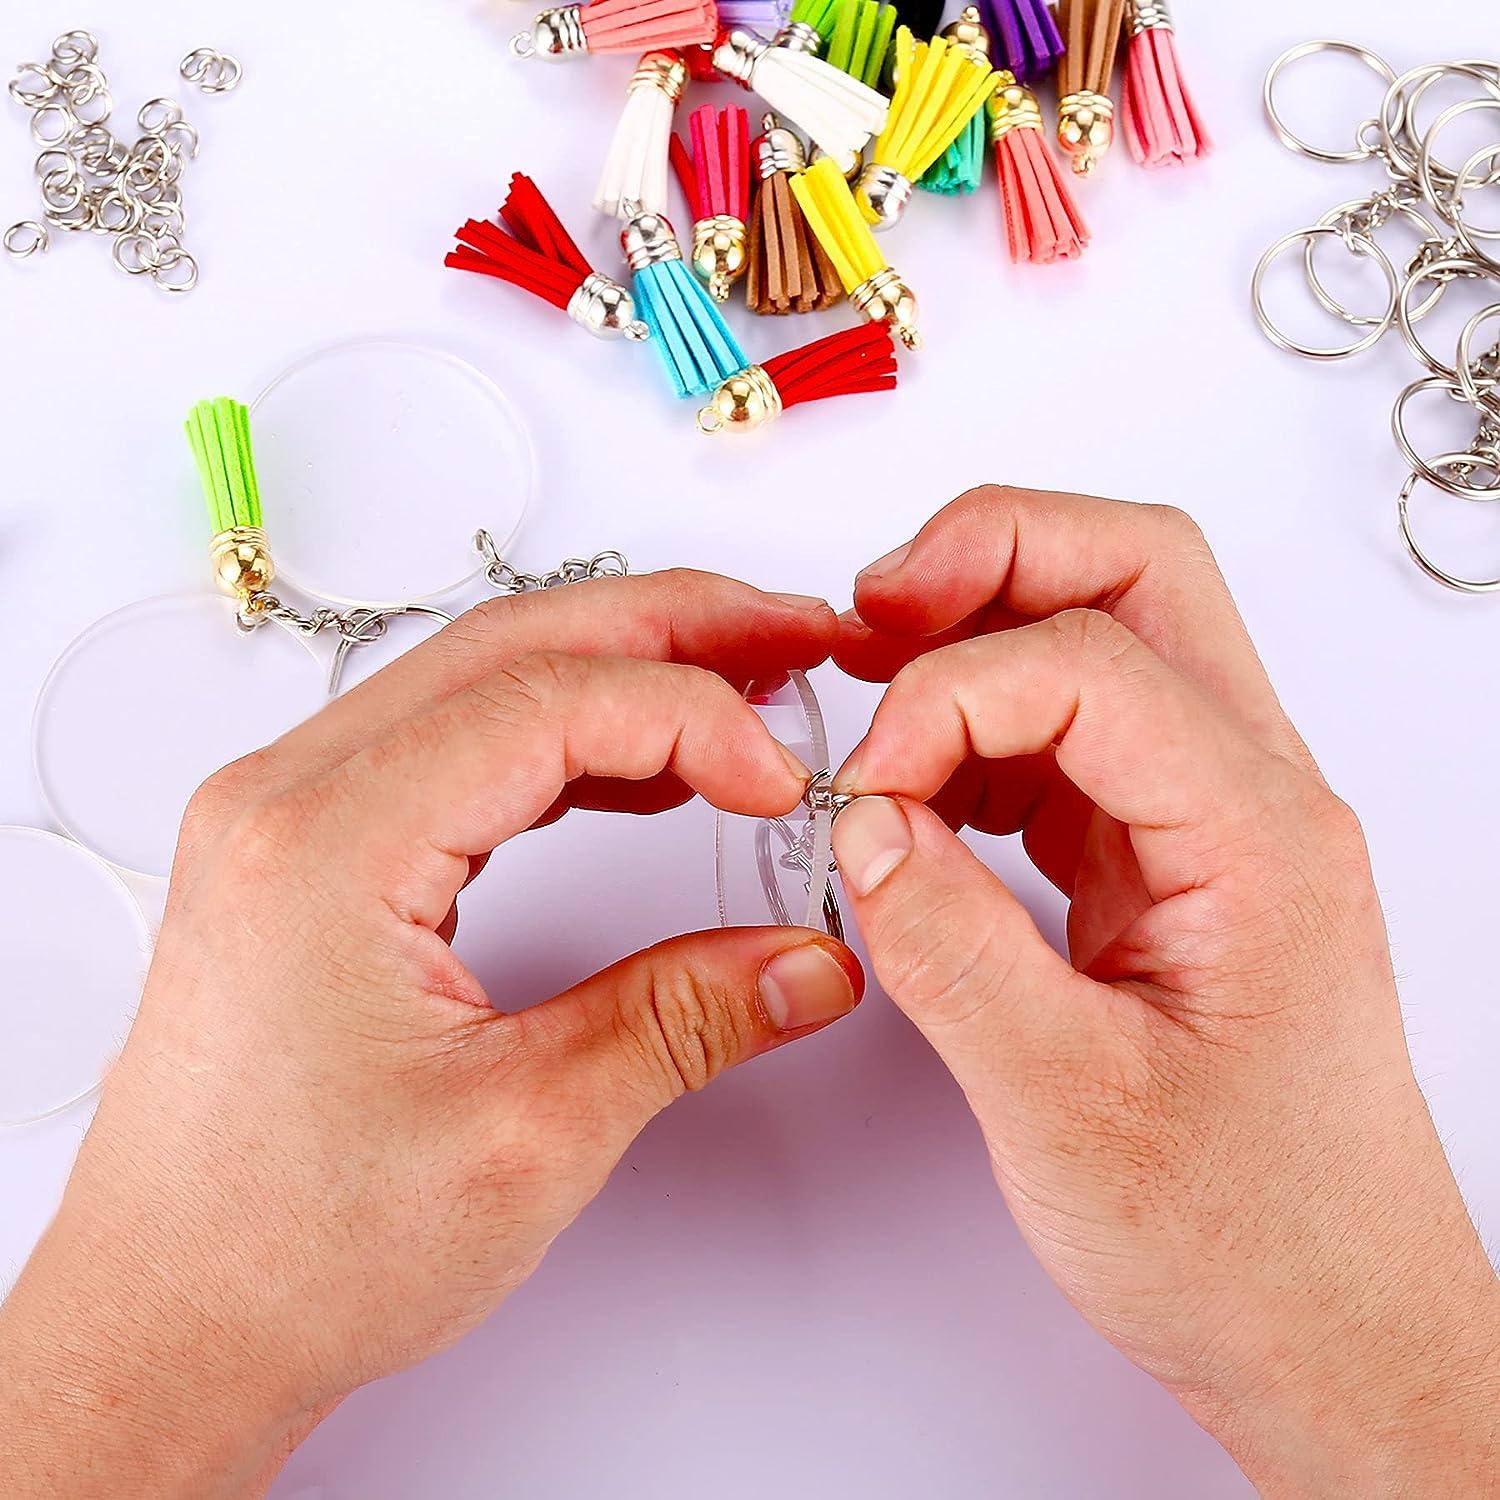 120 Pcs Acrylic Pencil Keychains with Key Rings, Tassels Key Chain for  Craft, Keychain Rings, Rings Key Chain Kit A 